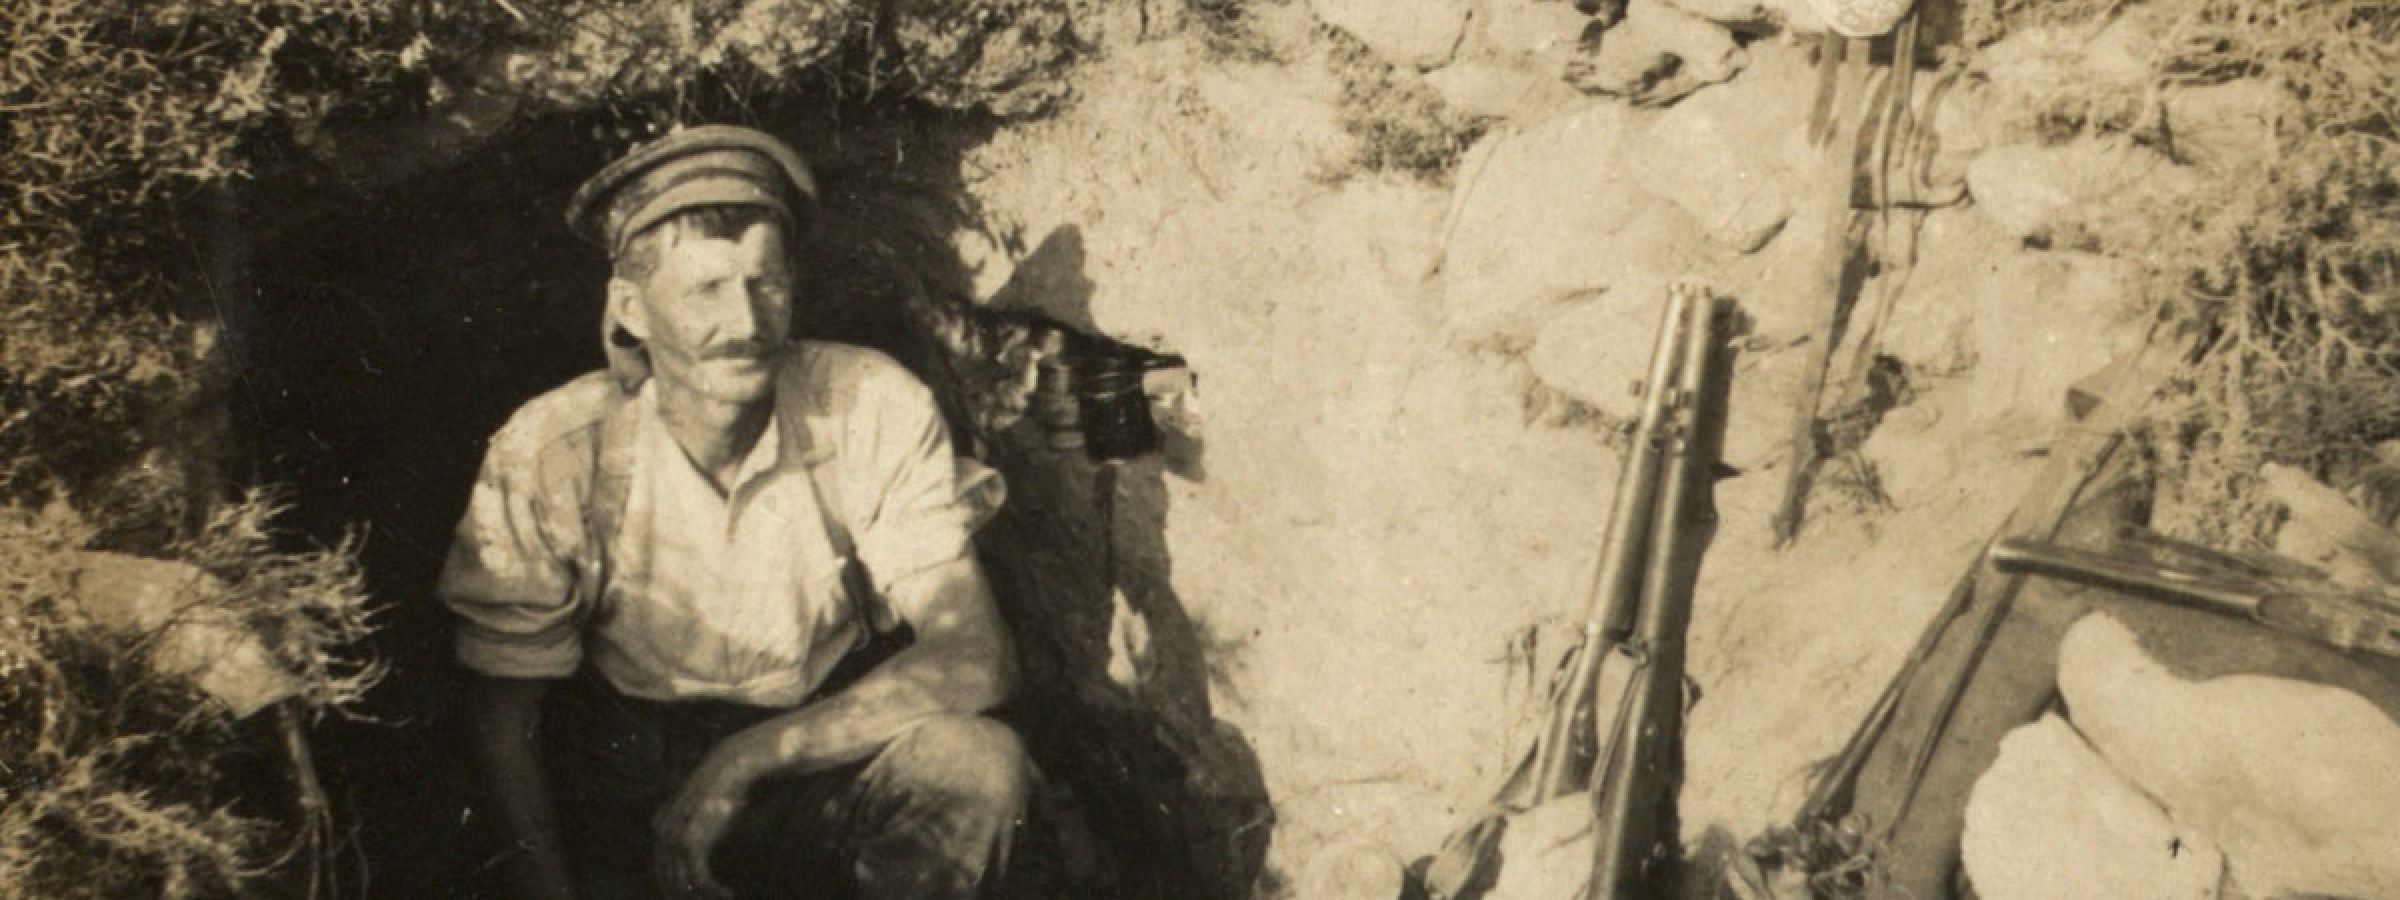 A photo of the Bivvy shared between 9/803 Corporal Curll Alexander Gordon Catto and 9/337 Trooper William Parlane (pictured), No 2 Outpost, Gallipoli.